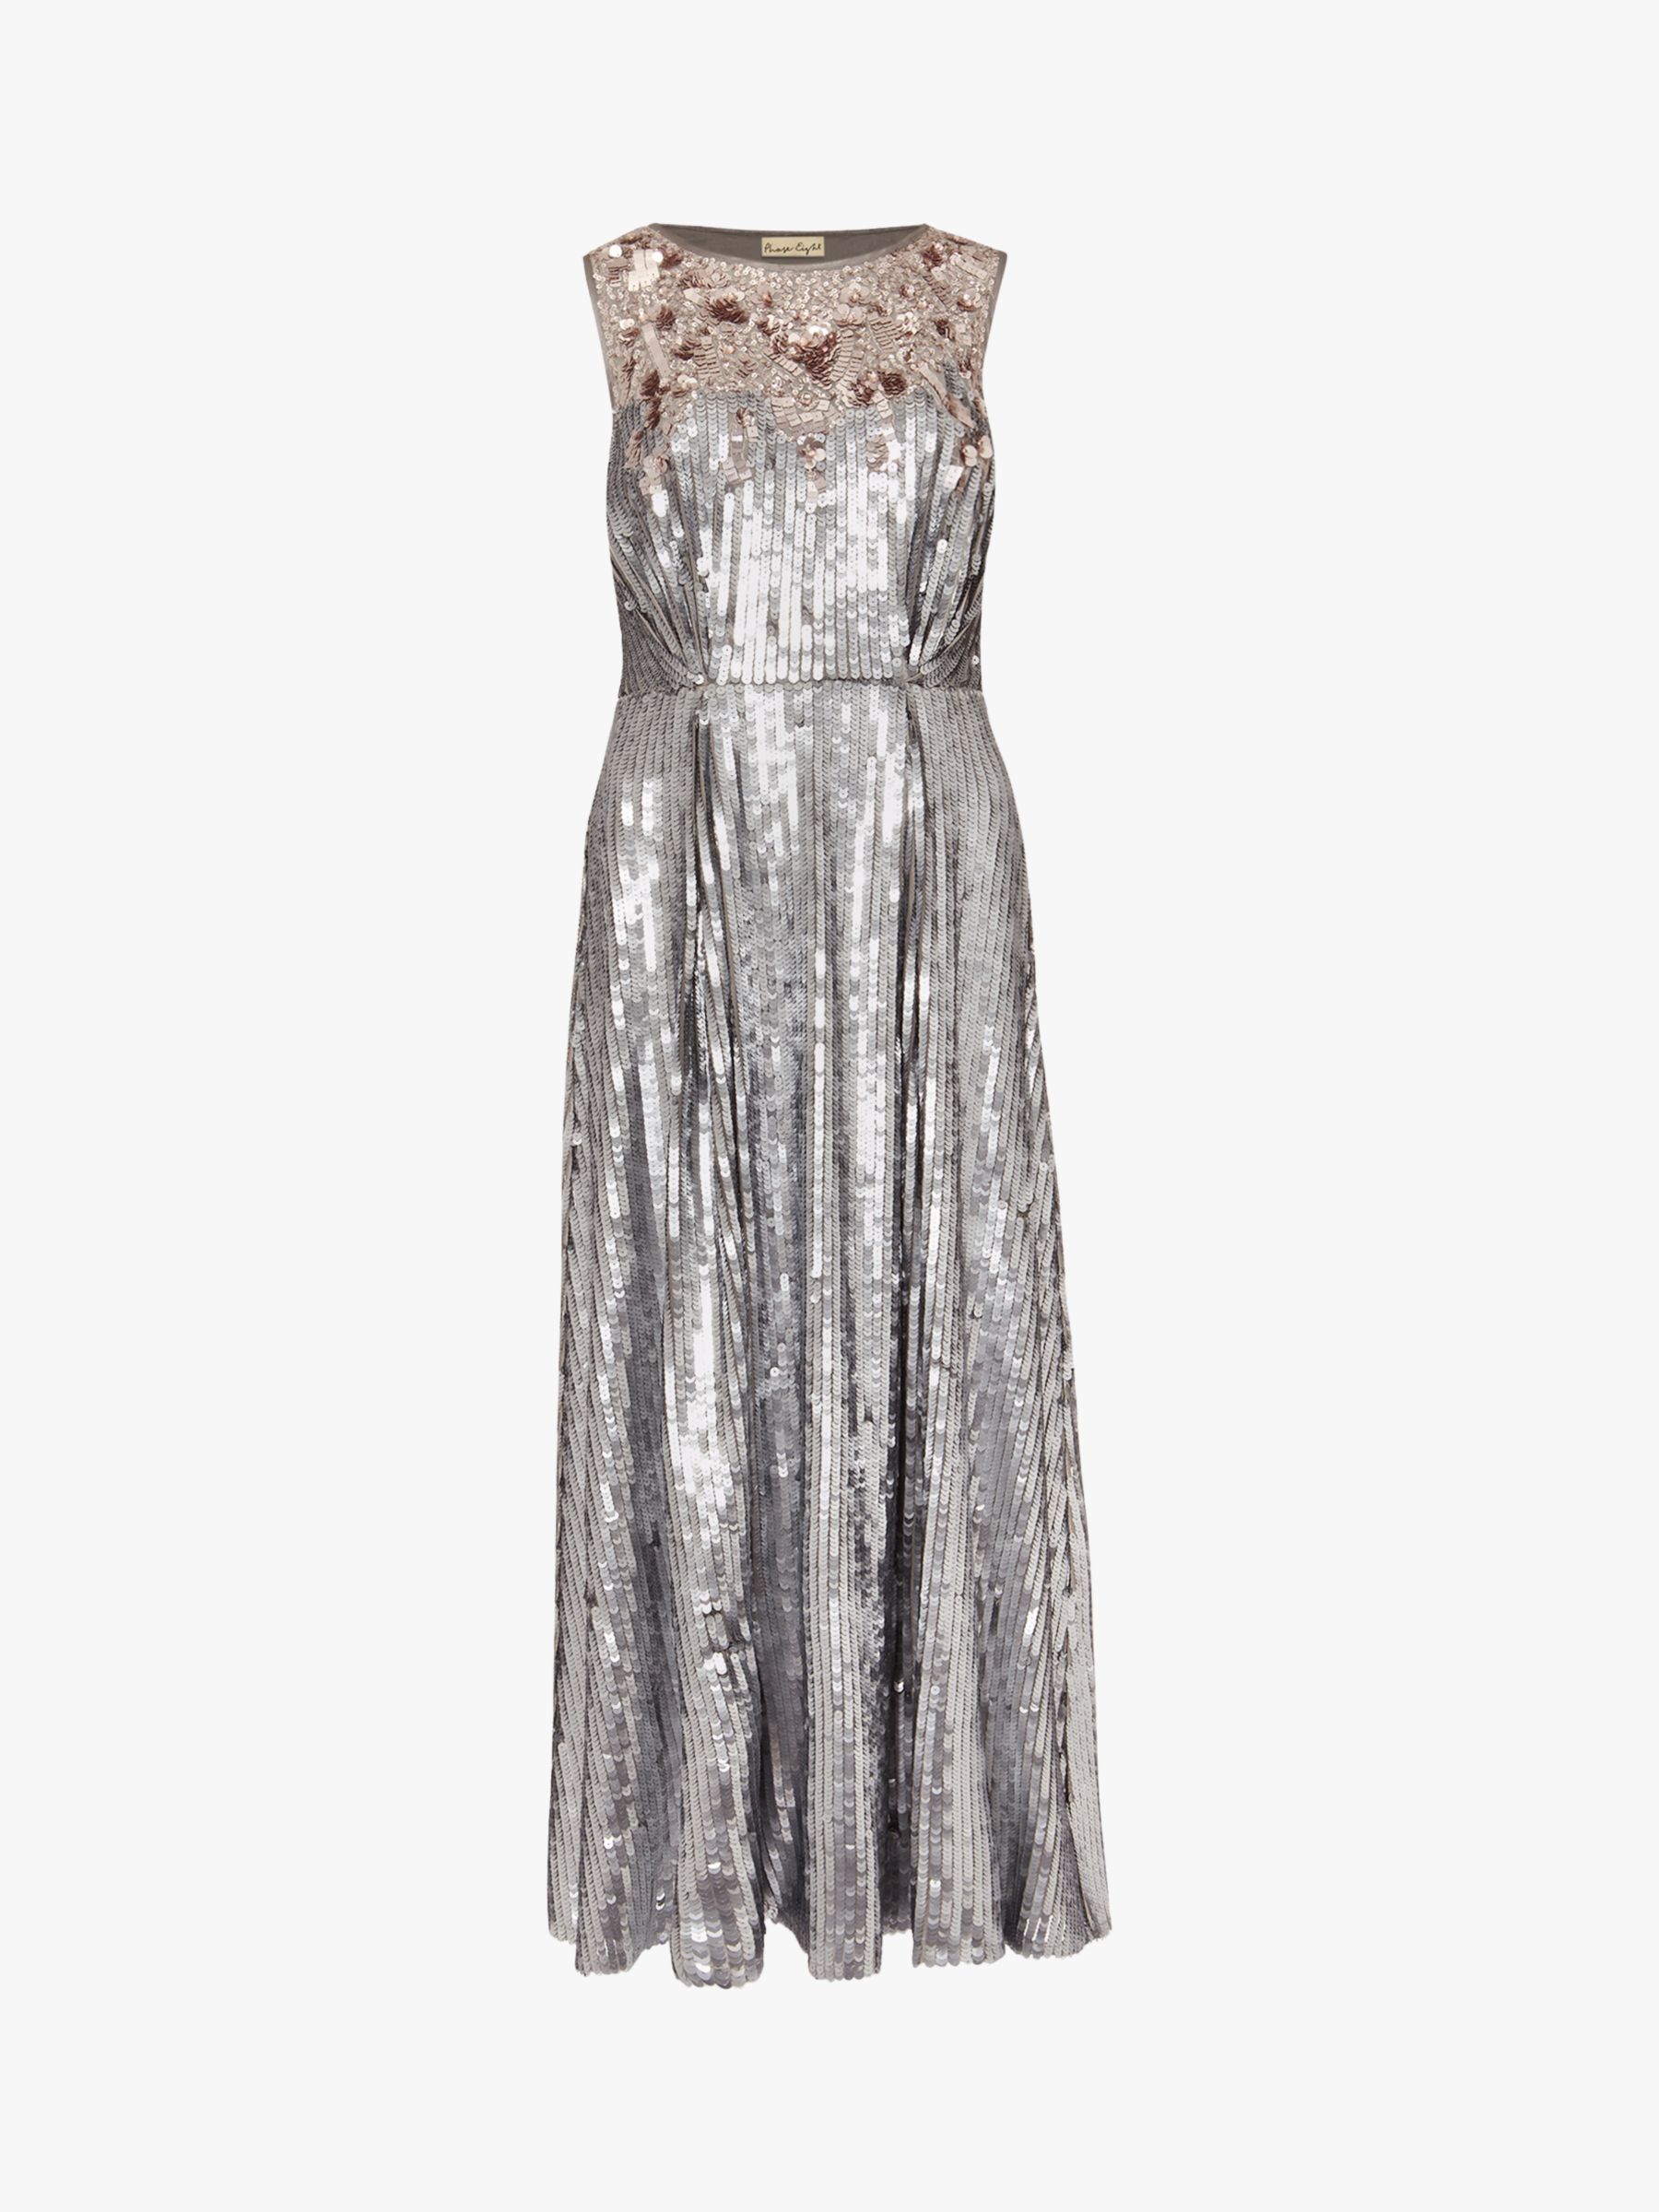 Phase Eight Lainey Shimmer Sequined Midi Dress, Silver at John Lewis ...